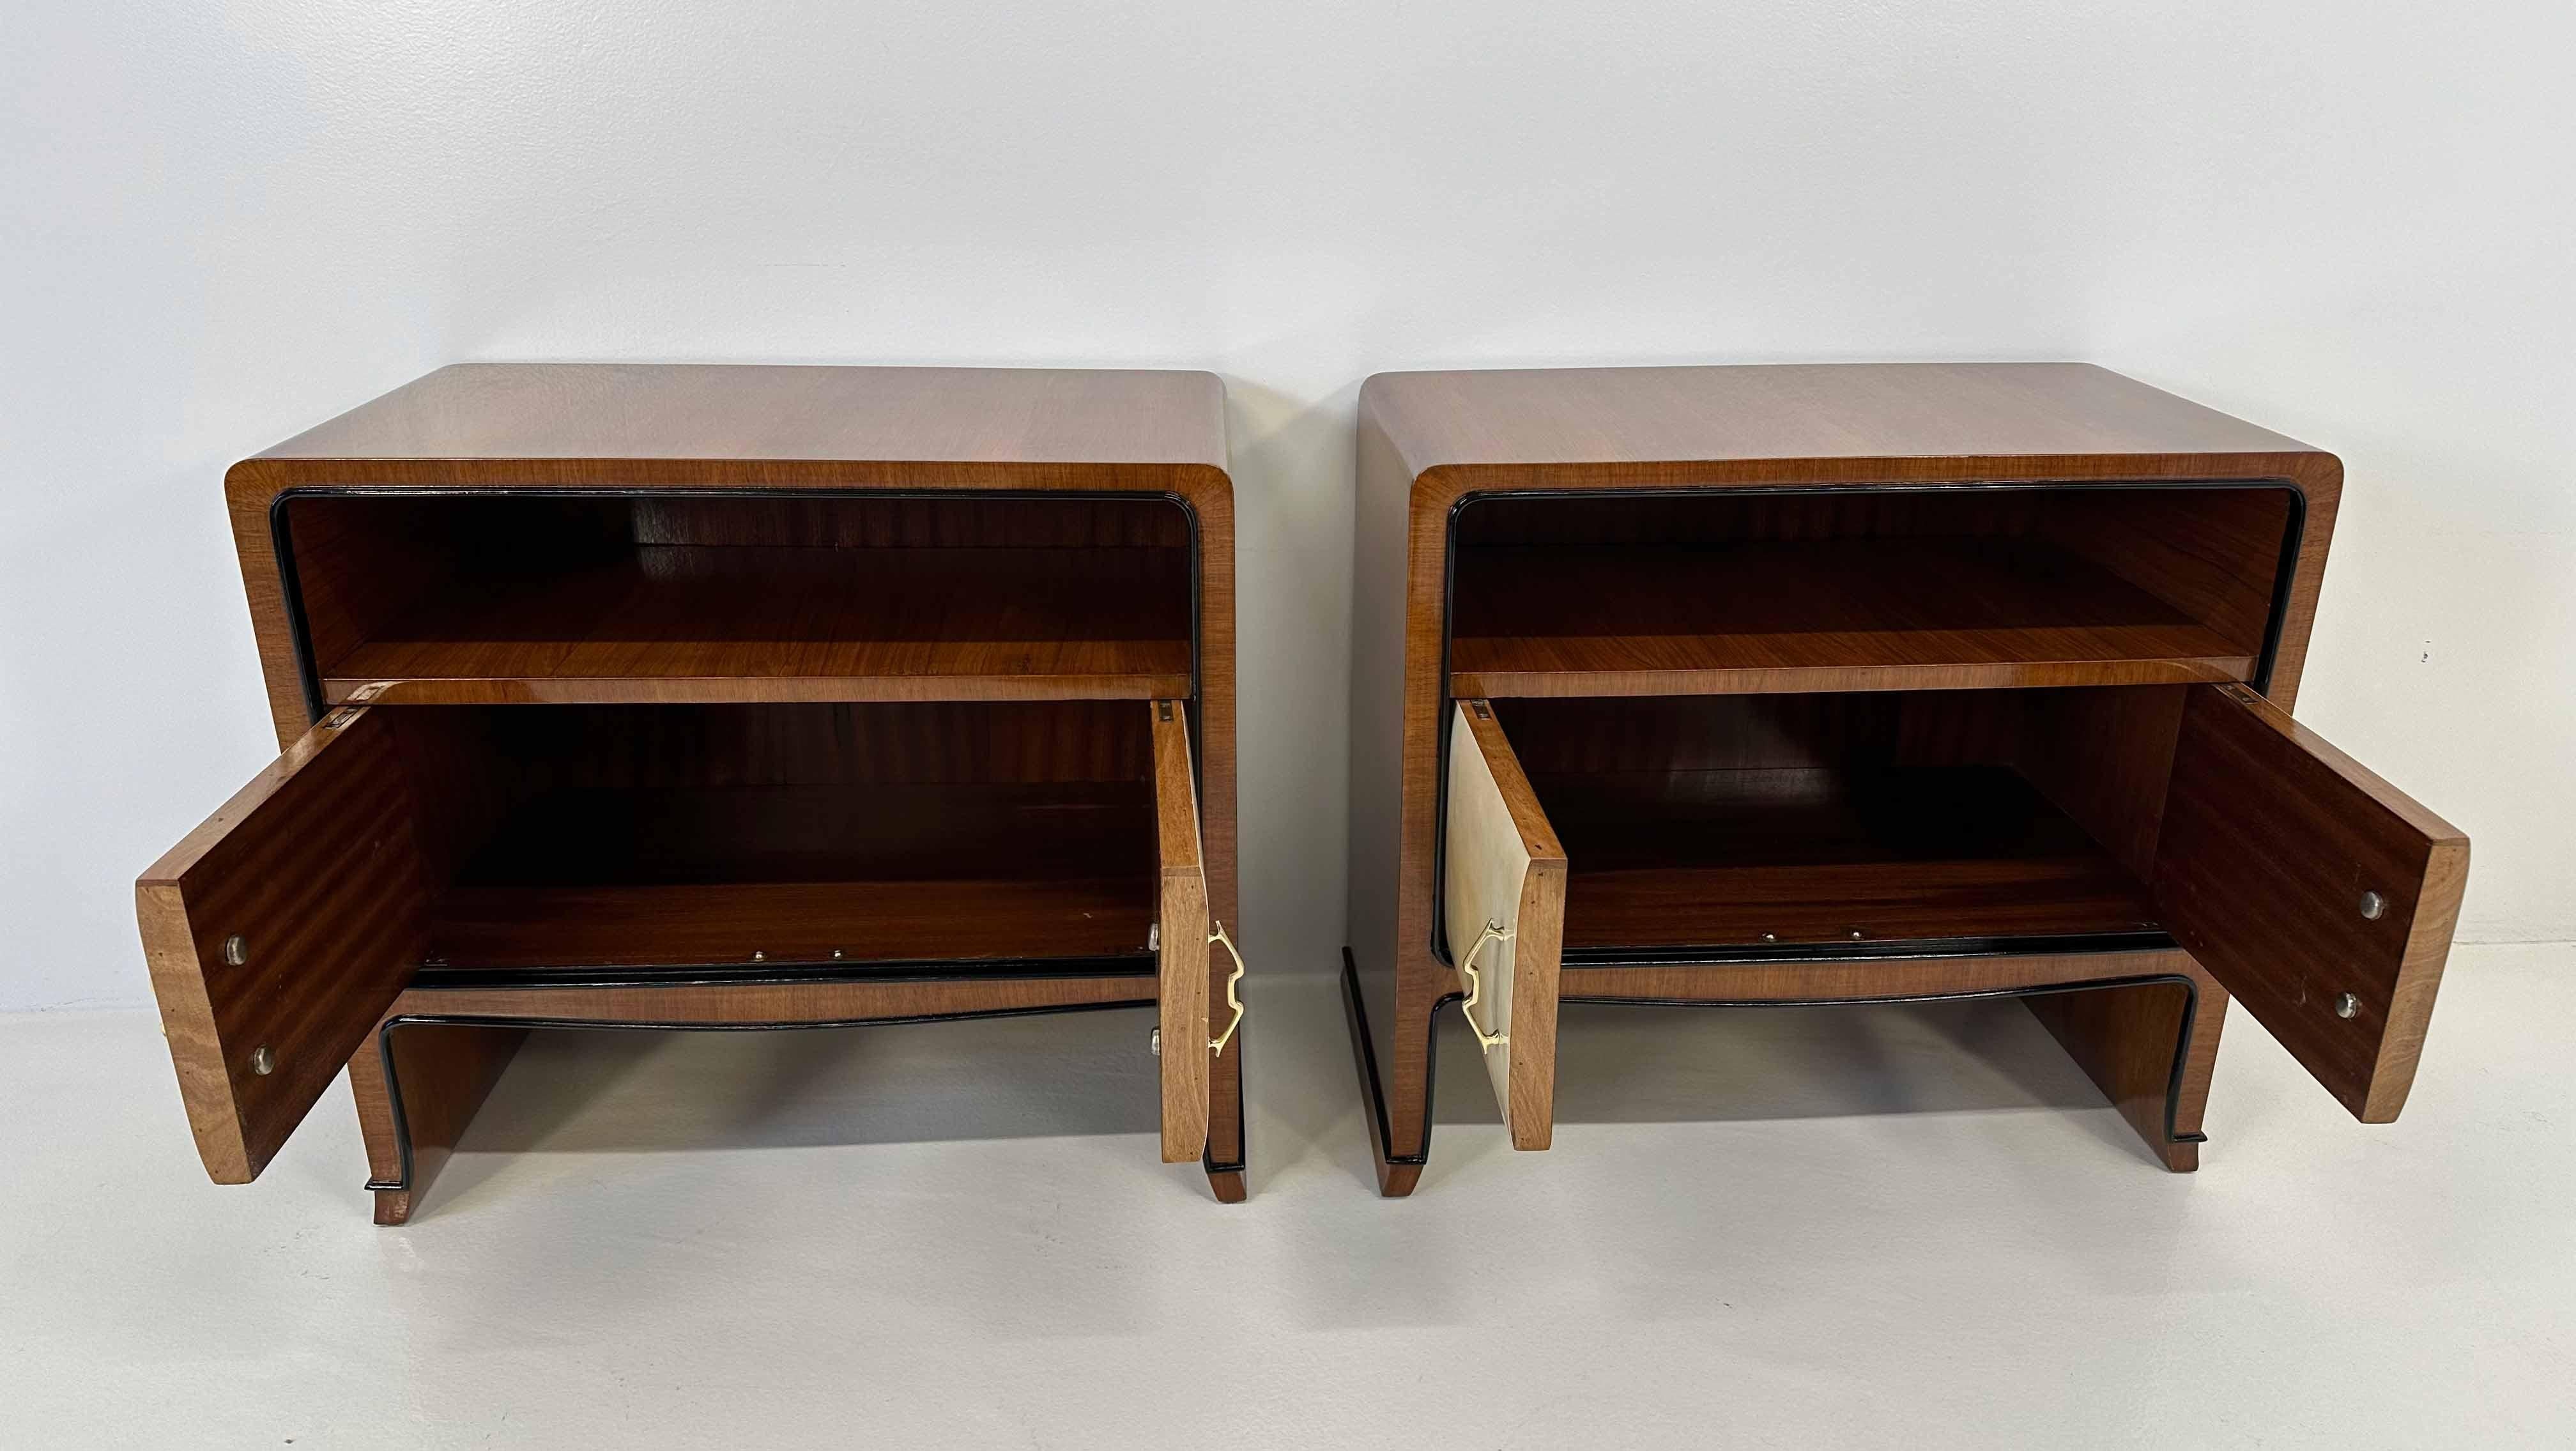 Italian Art Deco Parchment and Walnut Paolo Buffa Nightstands, 1940s For Sale 5